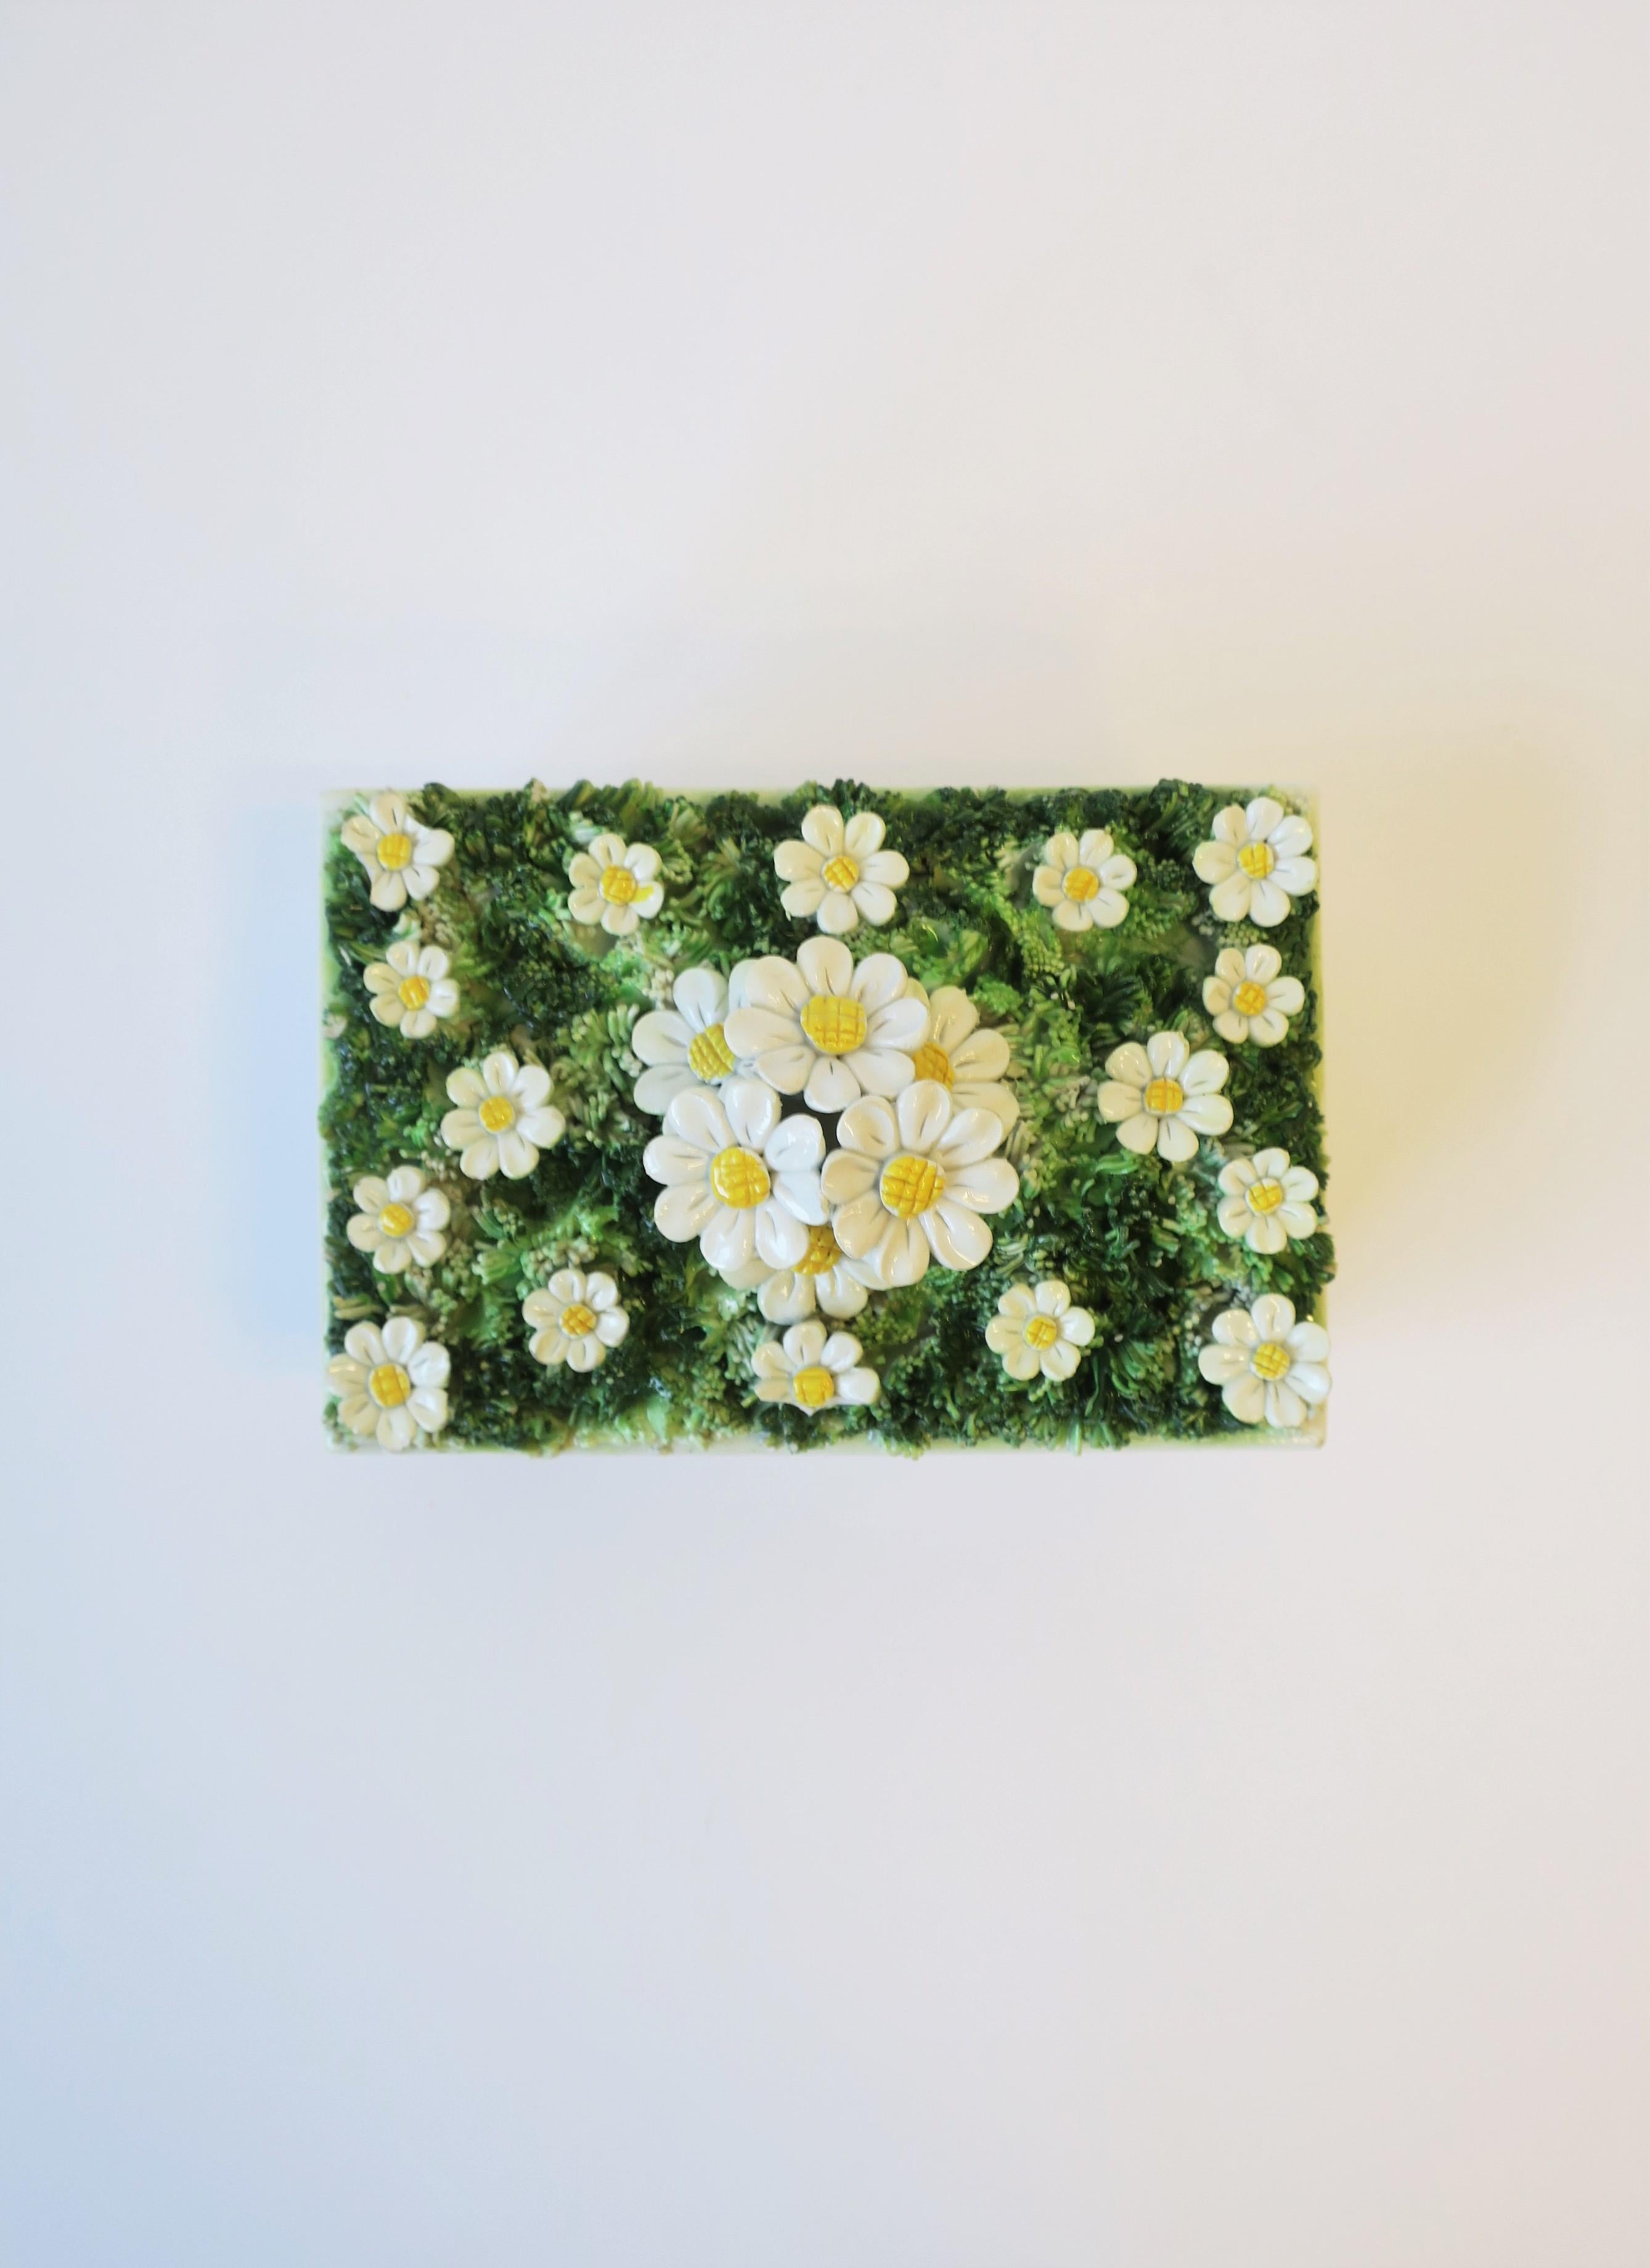 A great Italian ceramic 'Flower Box' decorative box or jewelry box, ca. 1960s, Italy. Ceramic box top is decorated with beautiful white and yellow daisy flowers and green 'grass'. Boxes' base has a lattice work exterior mimicking that of a garden